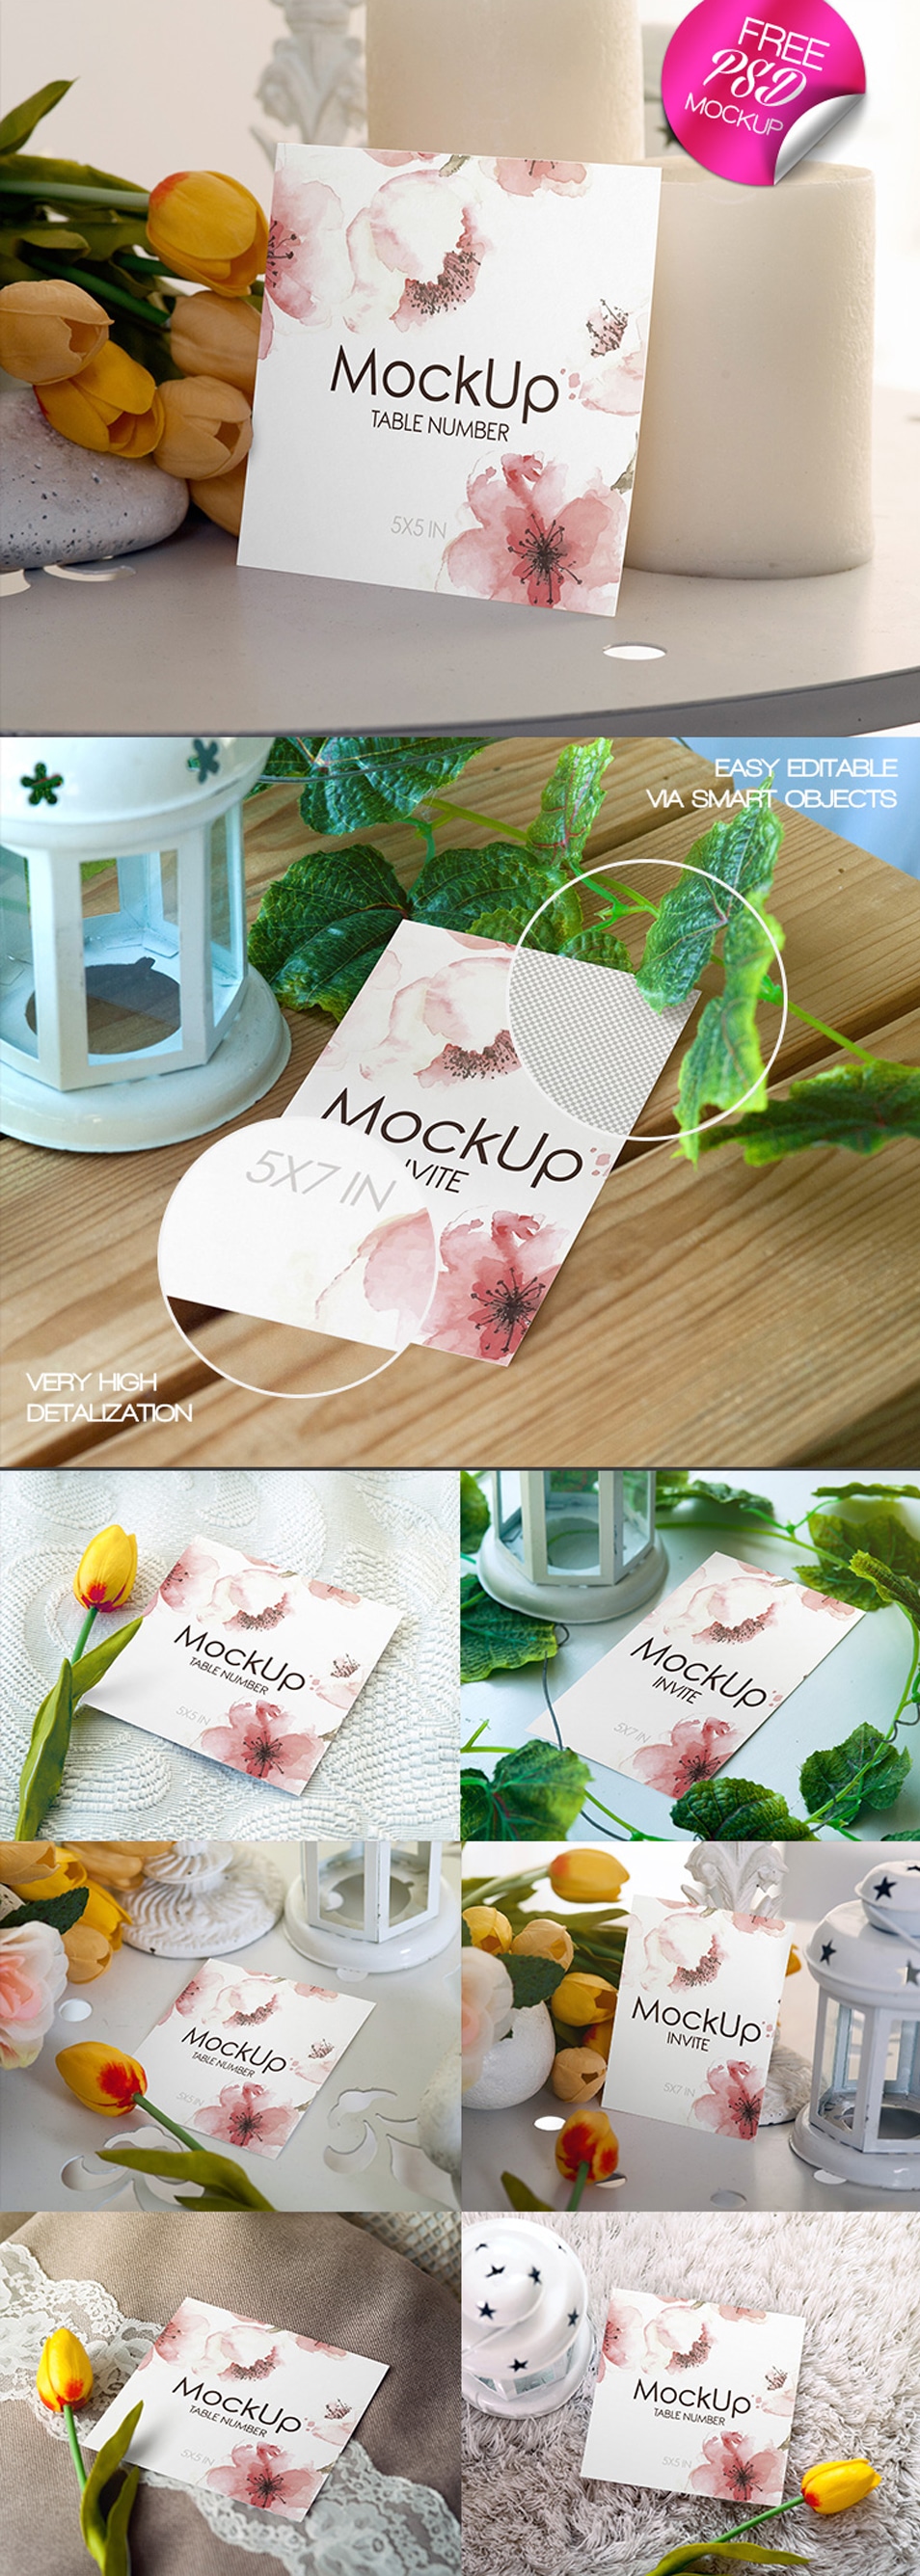 Download Free Wedding Invitation And Card Mockups Set » CSS Author